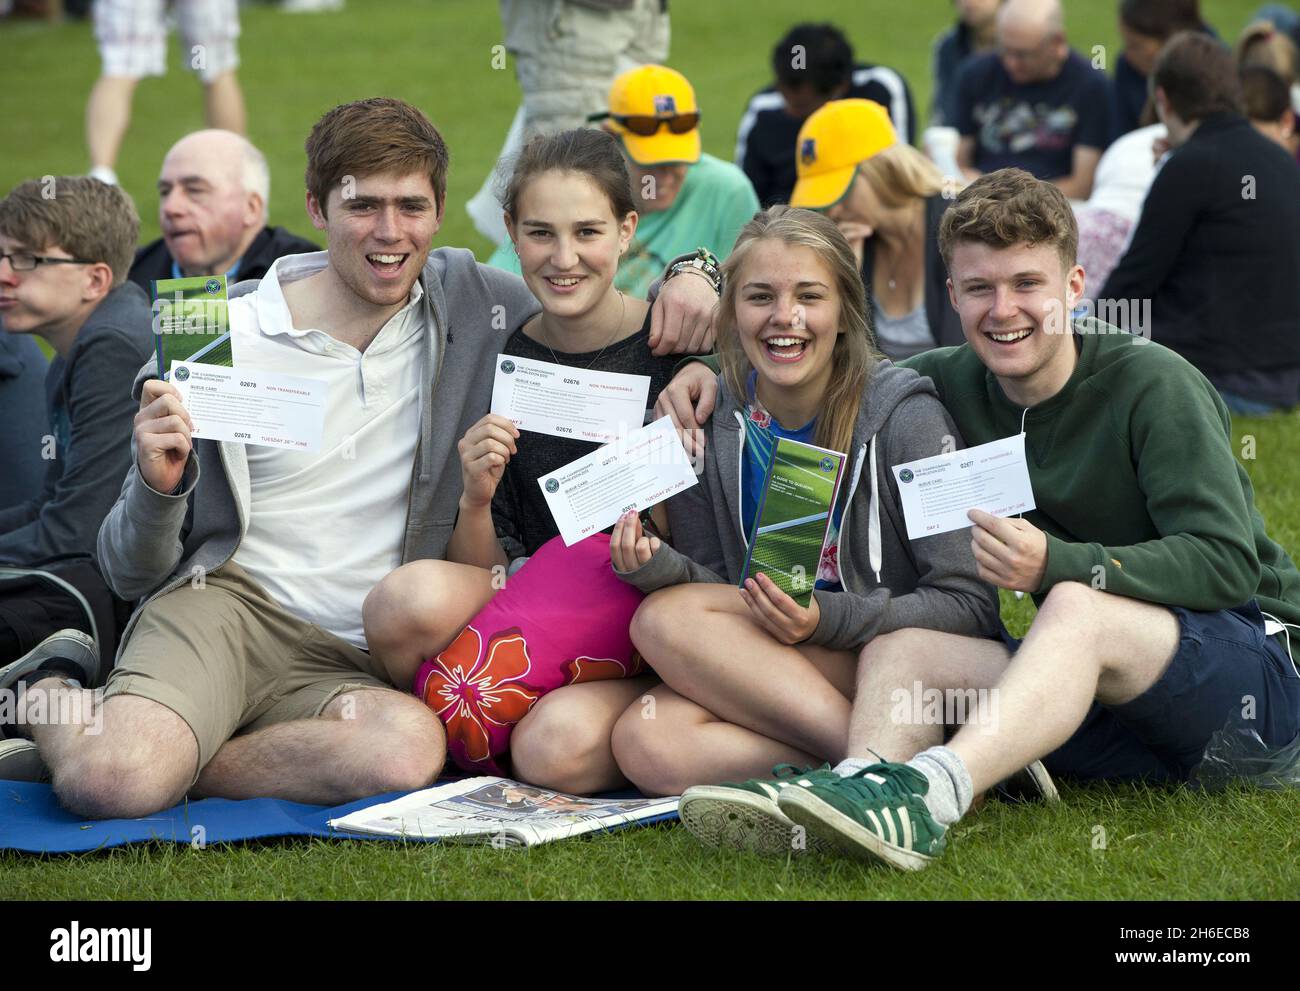 Andy Murray fans Laurence Dean, 17, Mel Beeston, 17, Sophie Taylormartin, 16, and Jonny Tunnacliffe 17 from Cambridge prepare for Andy Murrays Centre Court match during day 2 of Wimbledon. Stock Photo